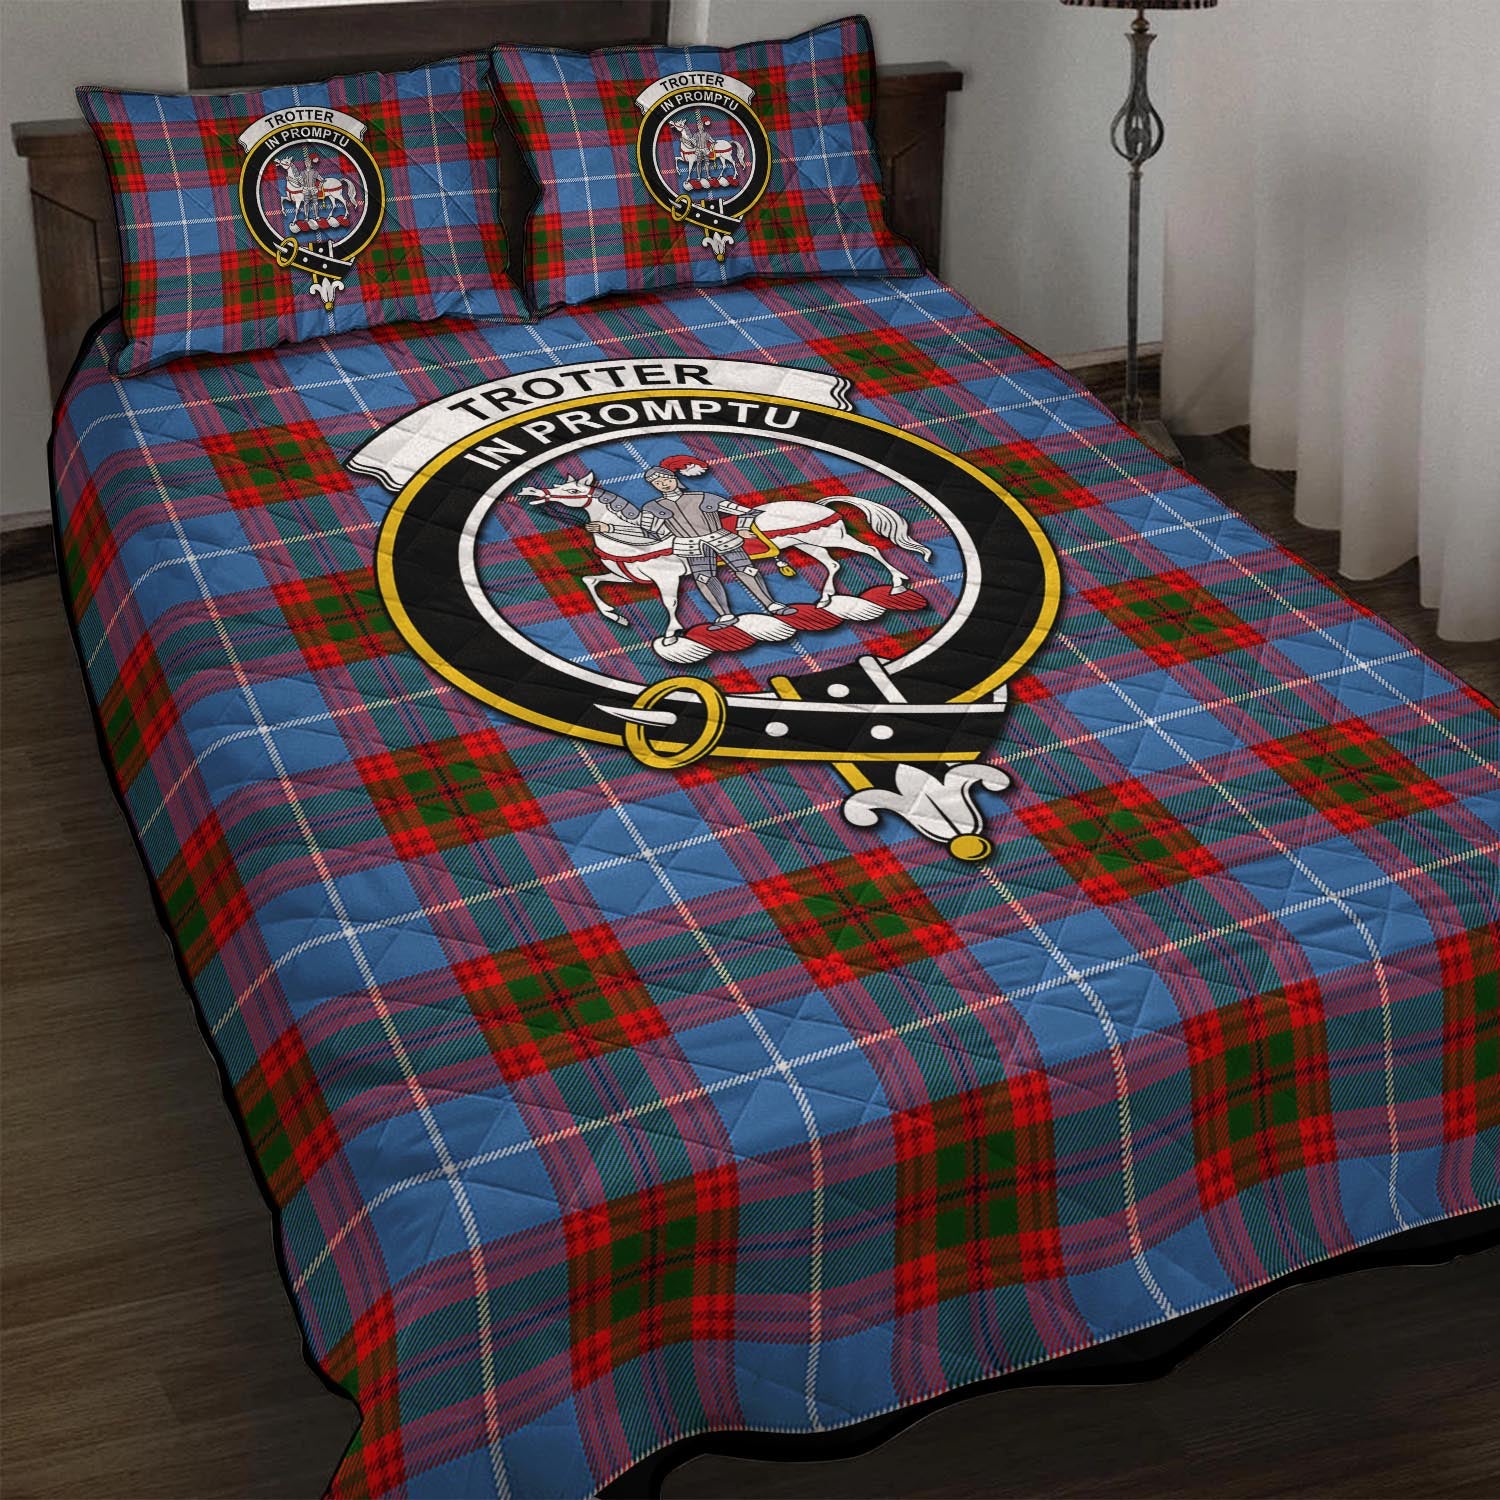 Trotter Tartan Quilt Bed Set with Family Crest